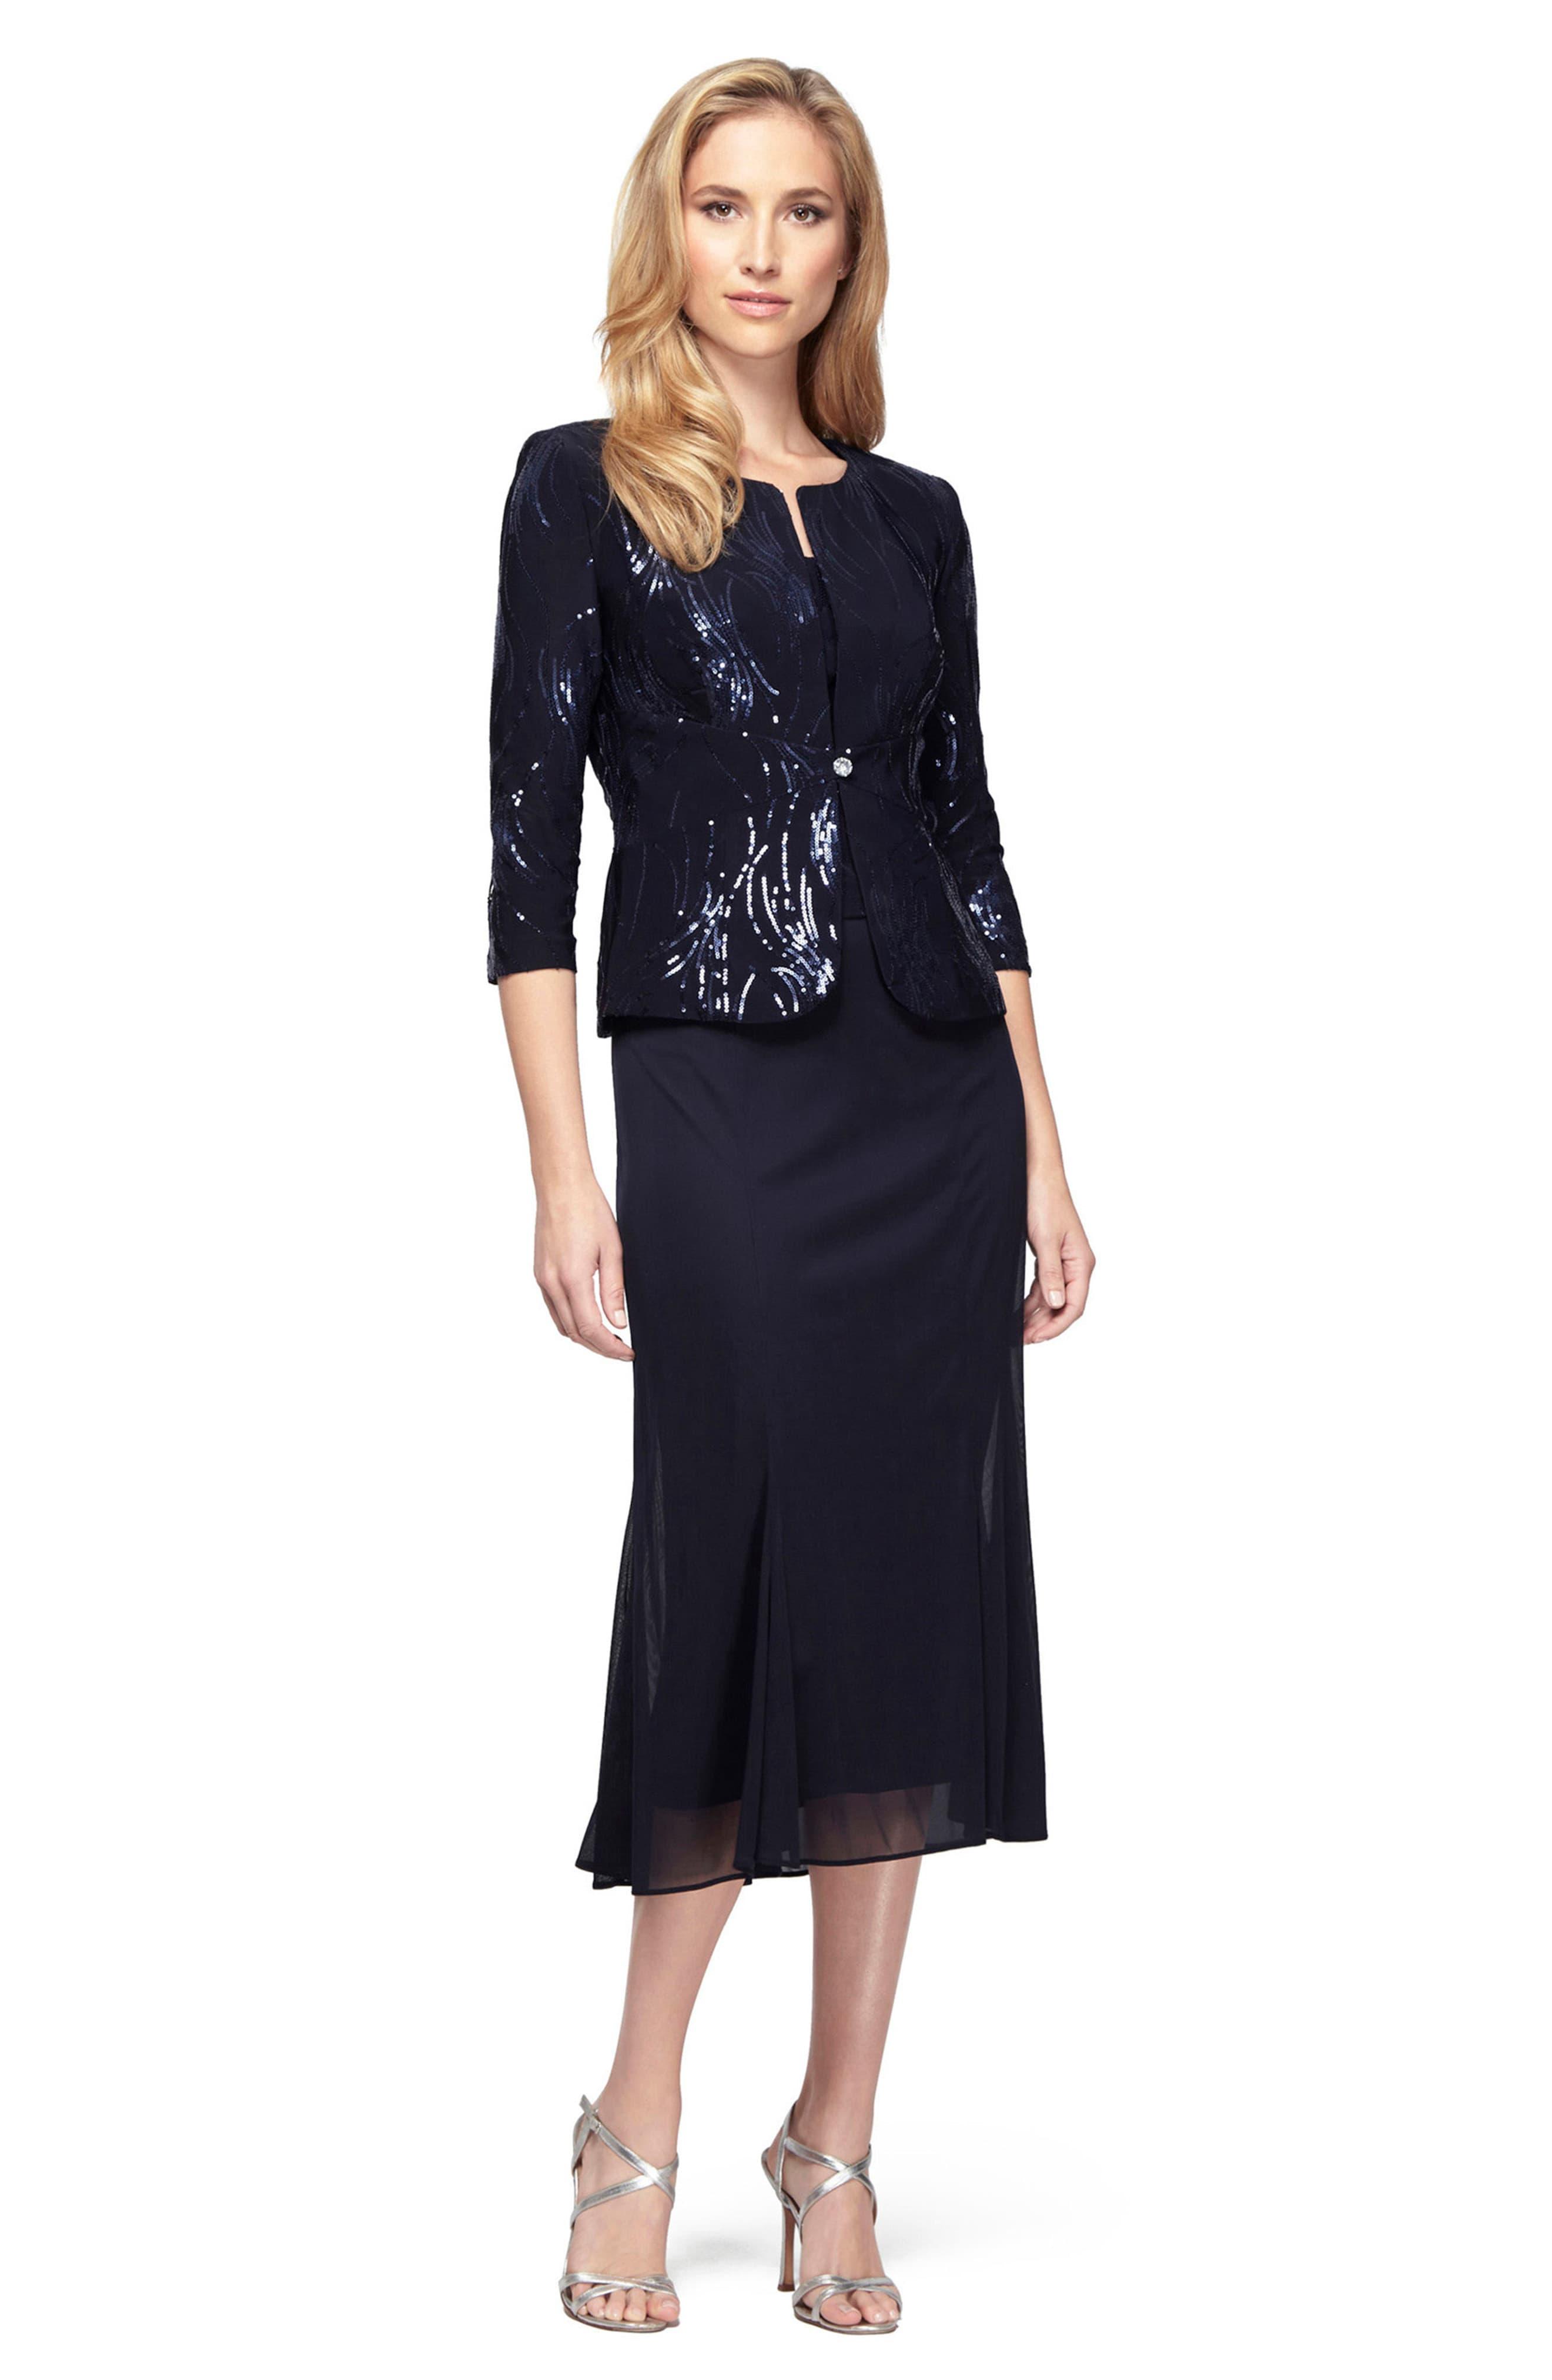 Alex Evenings Sequin Midi Dress With Jacket in Navy (Blue) - Lyst